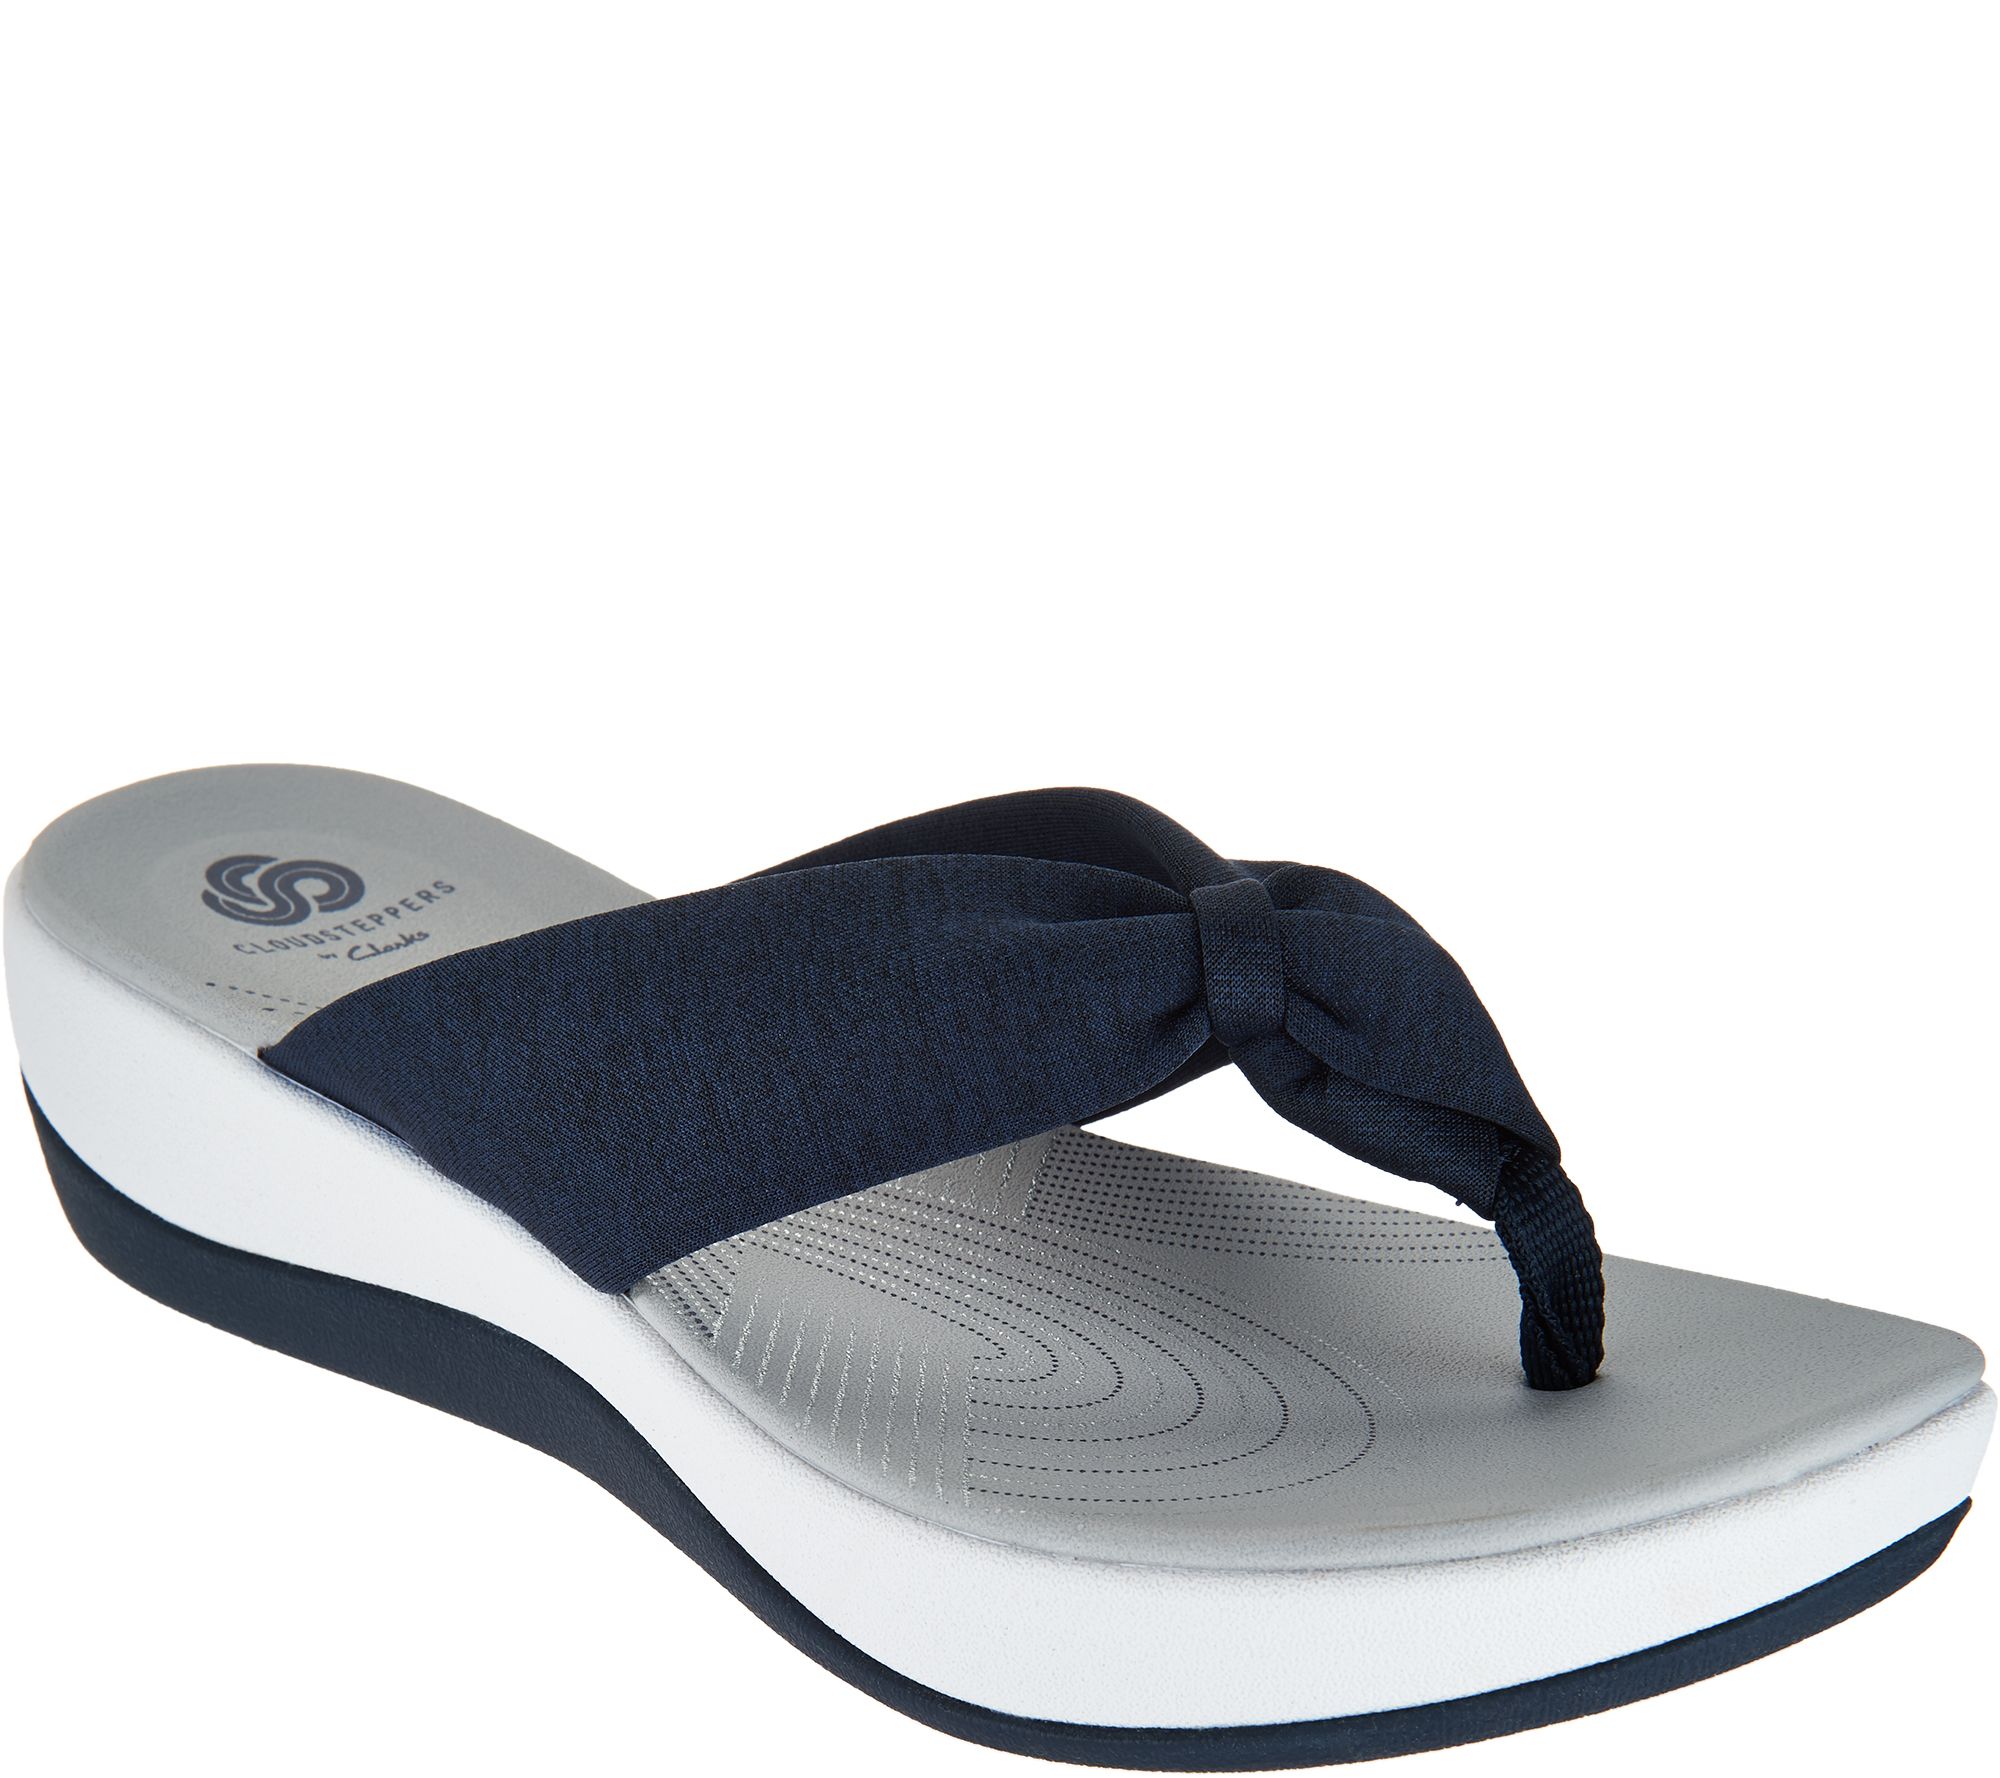 clarks cloudsteppers thongs